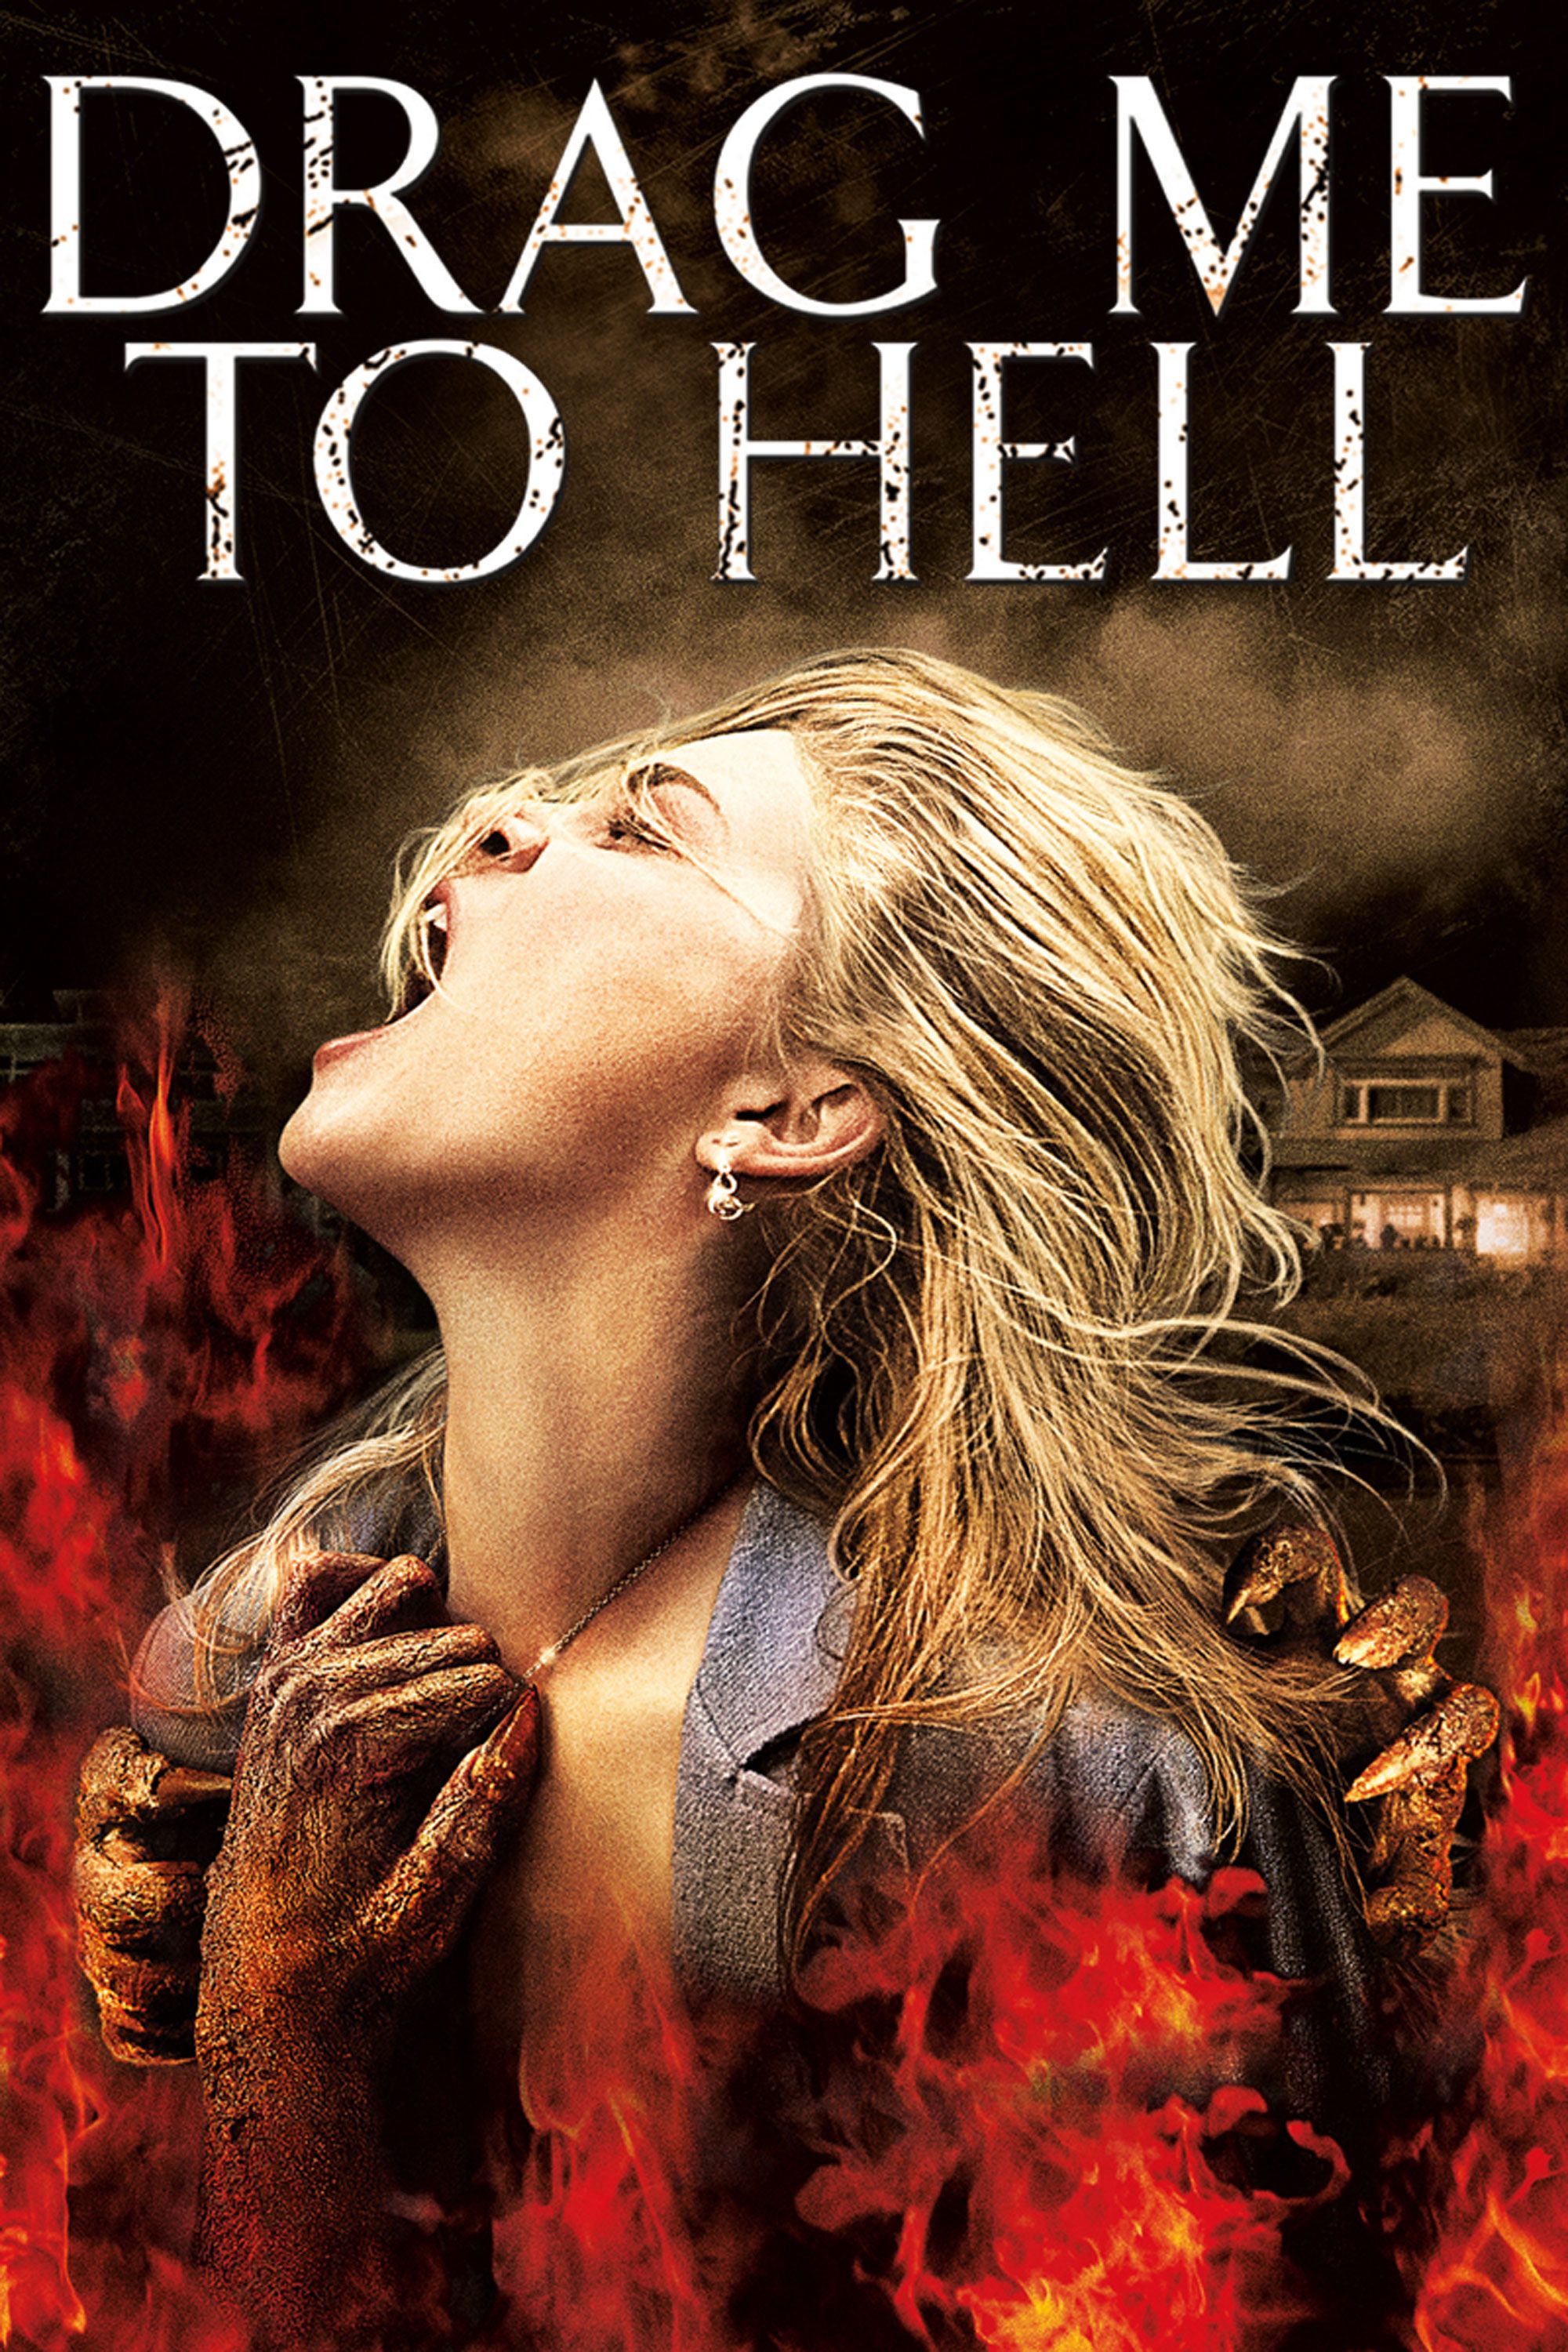 watch drag me to hell free online full movie